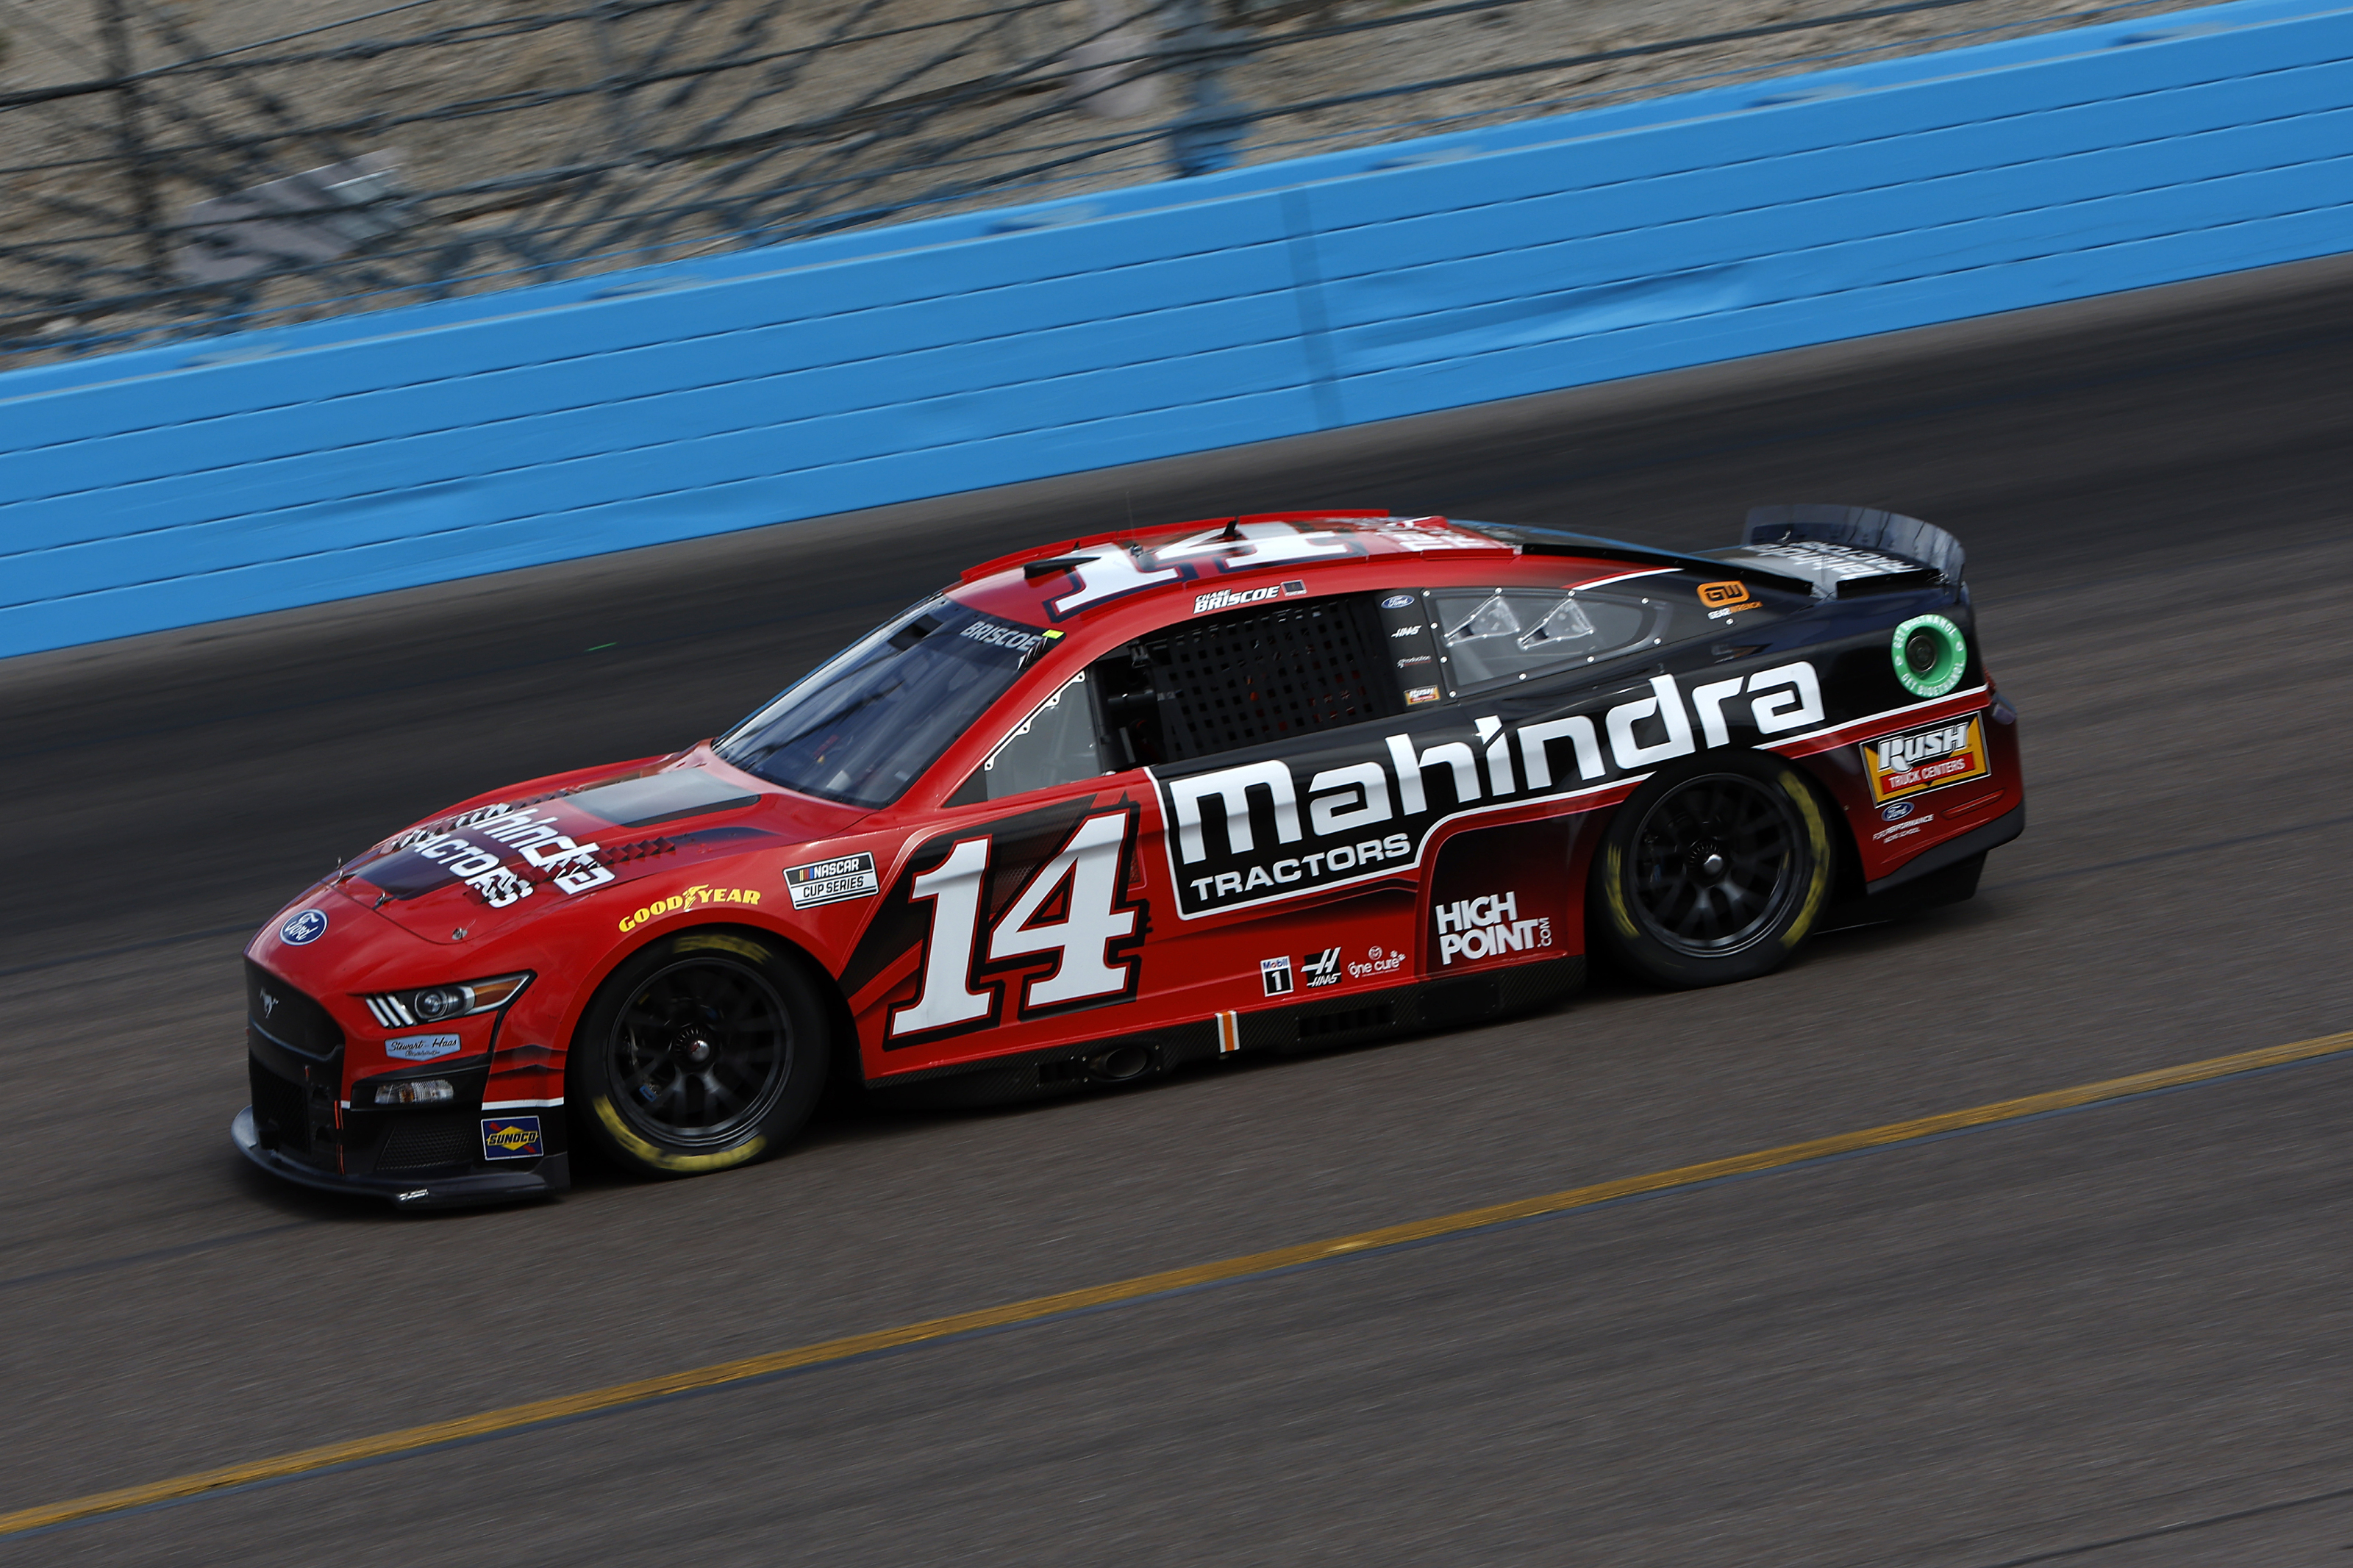 NASCAR extends an incredible all-time record at Phoenix